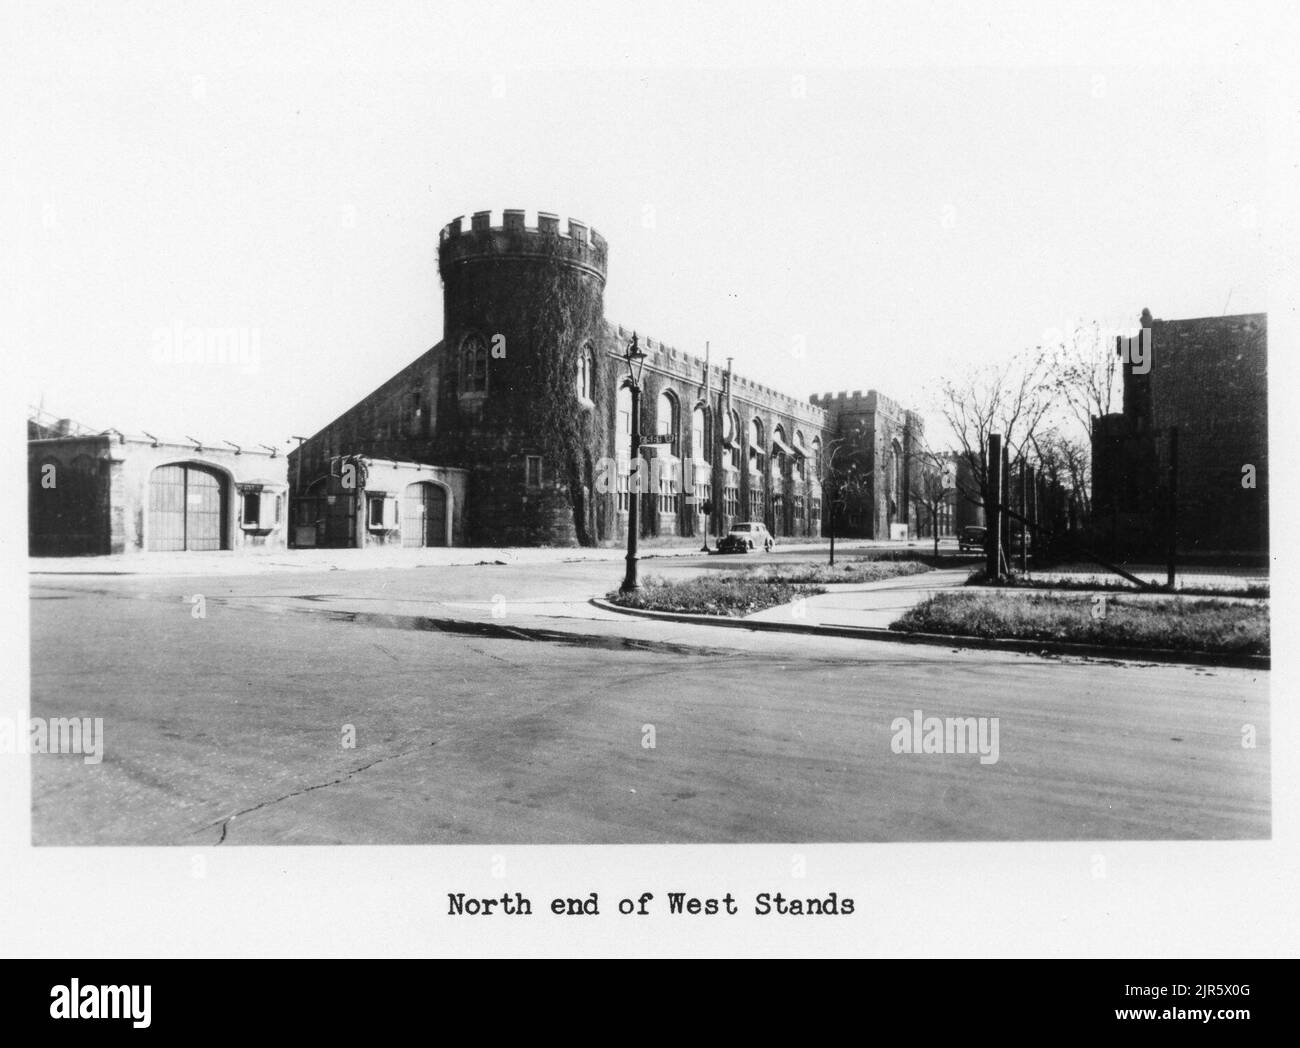 Stagg Field, University of Chicago. North end of West Stands.. 1955 - 1979. National Department of Energy. Activities and Personnel of the Department of Energy and Predecessor Agencies Stock Photo